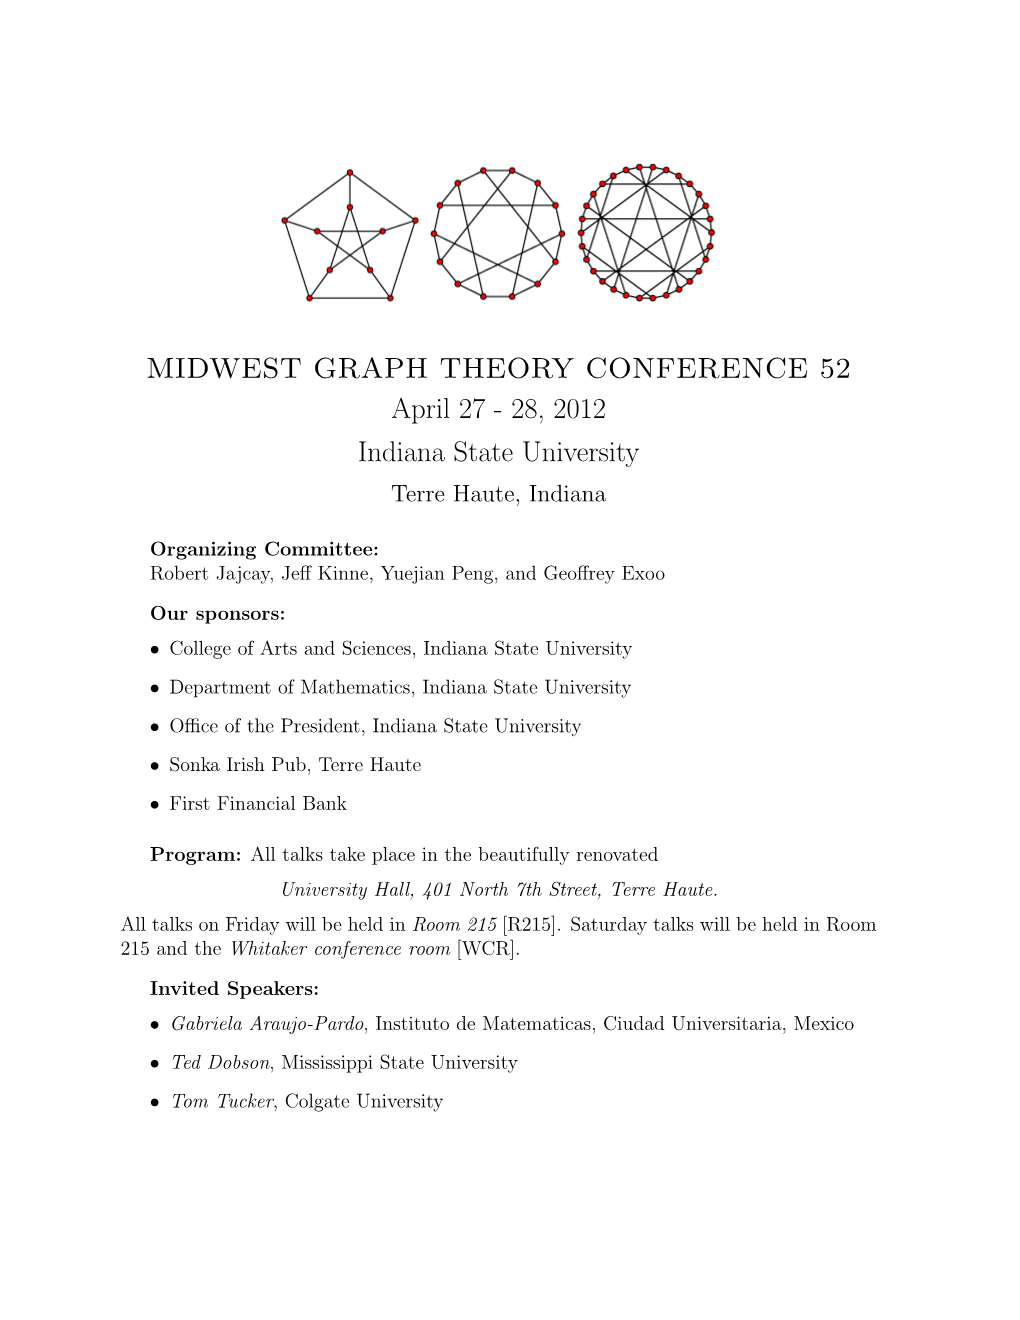 MIDWEST GRAPH THEORY CONFERENCE 52 April 27 - 28, 2012 Indiana State University Terre Haute, Indiana